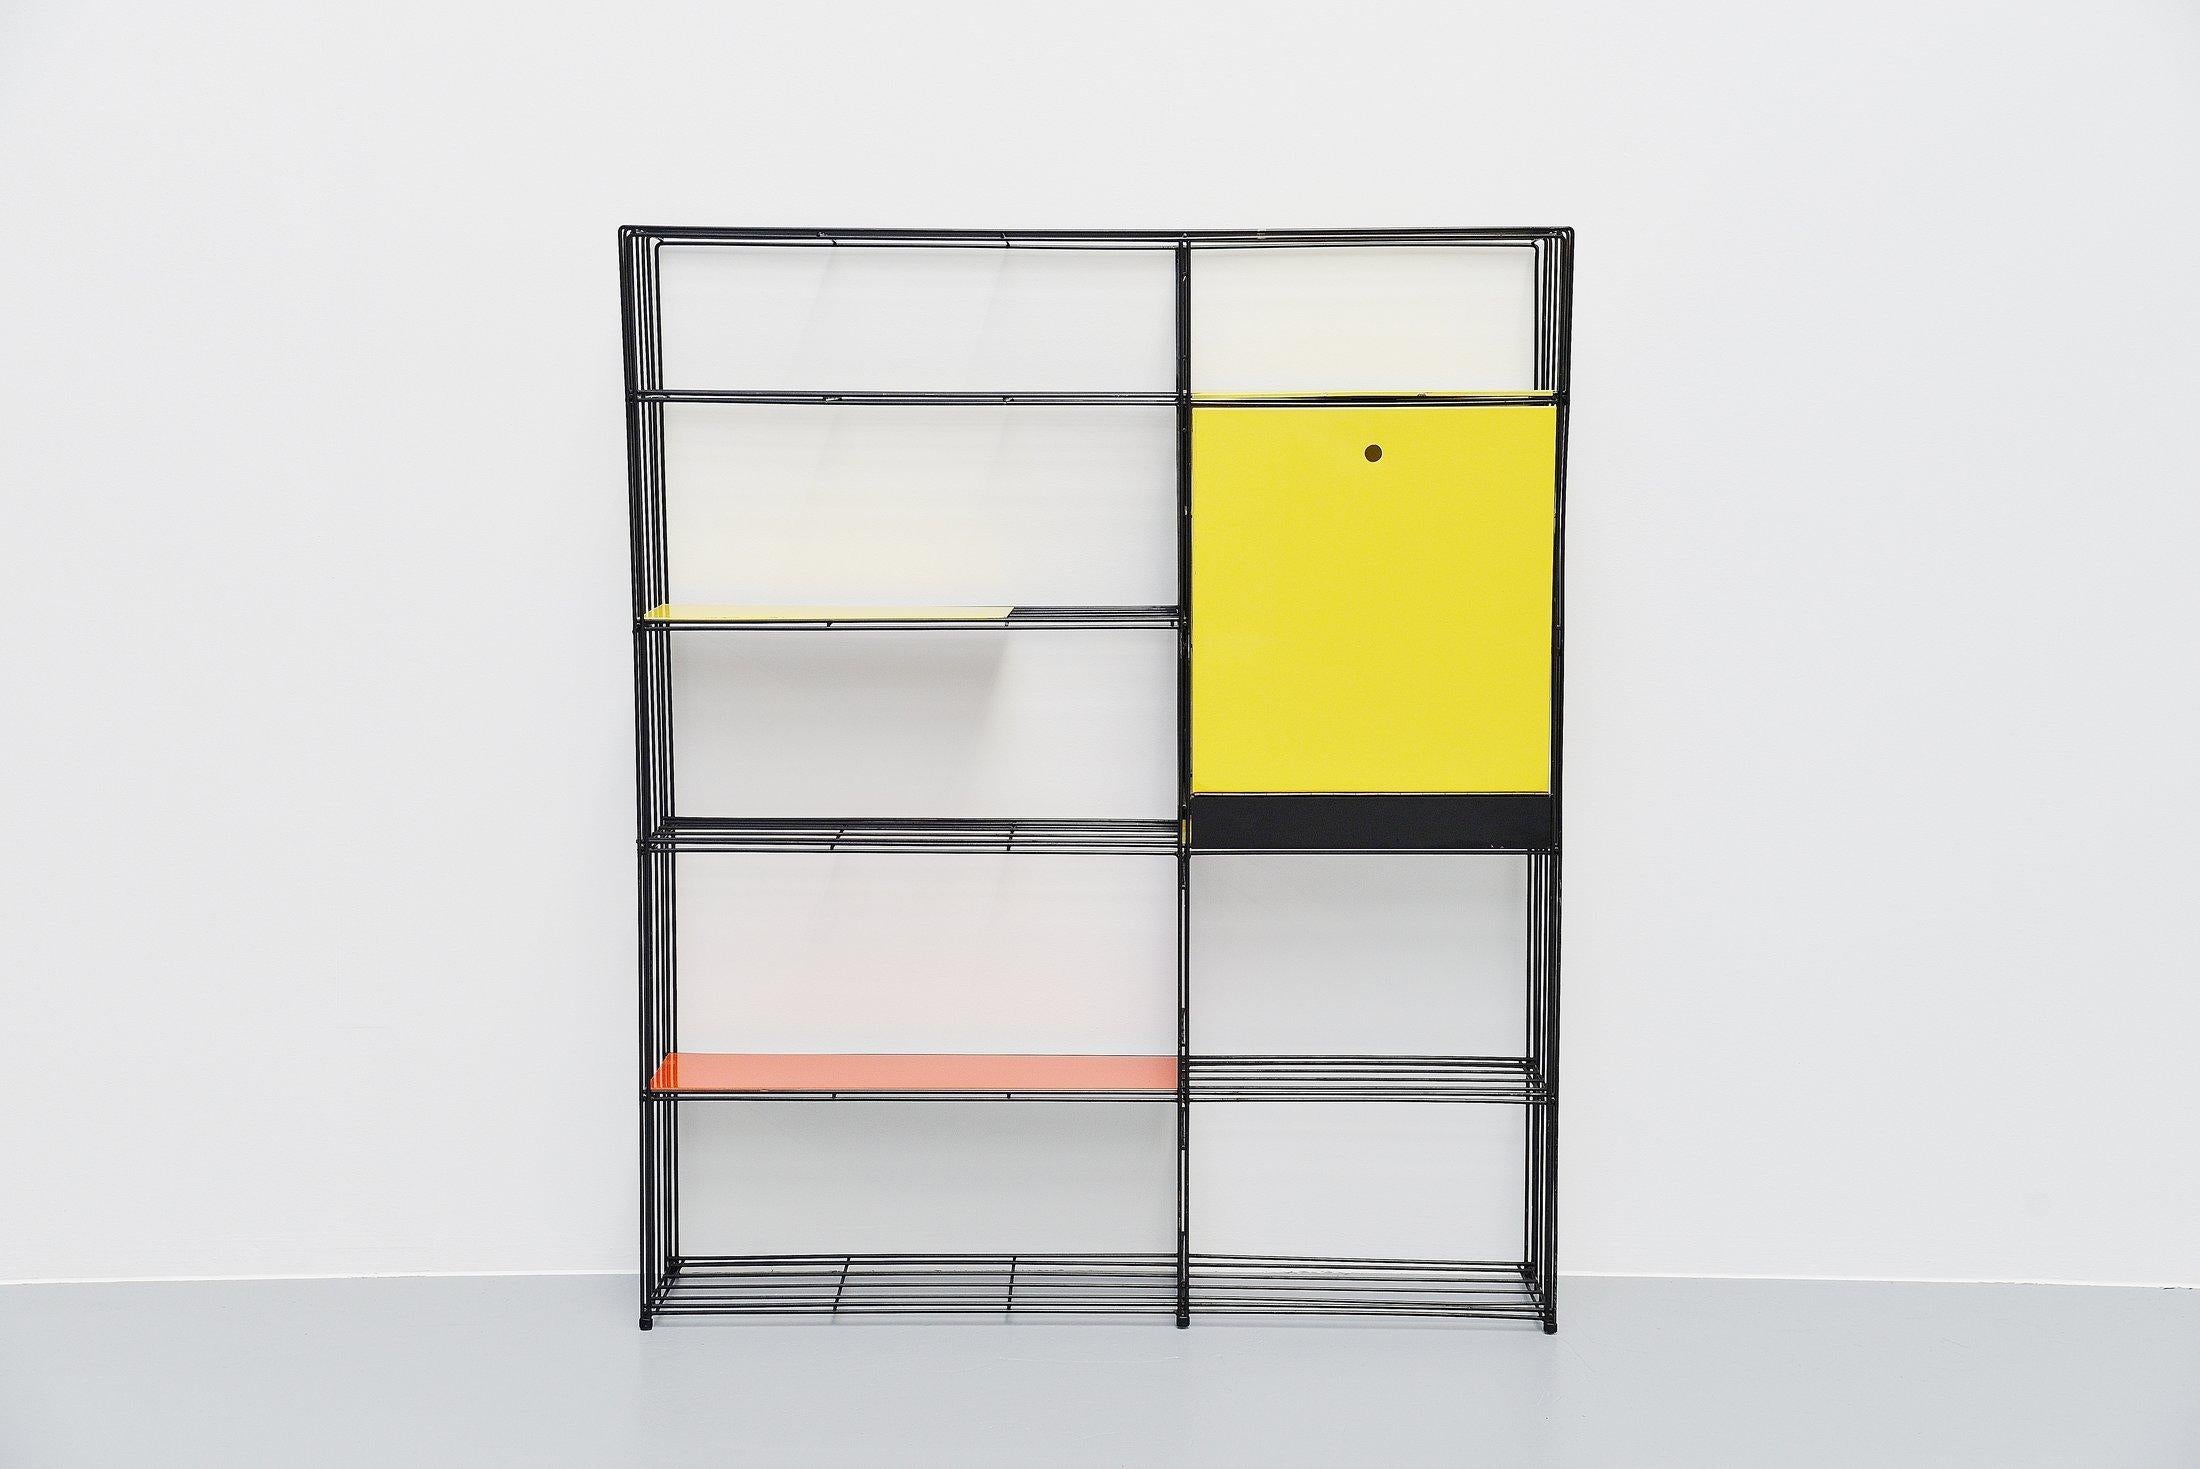 This very nice bookcase / room divider designed by Tjerk Reijenga and manufacrured by Pilastro , Holland 1960. This black wire frame divider is complete with the original colored shelves which are often missing or replaced.  This example has